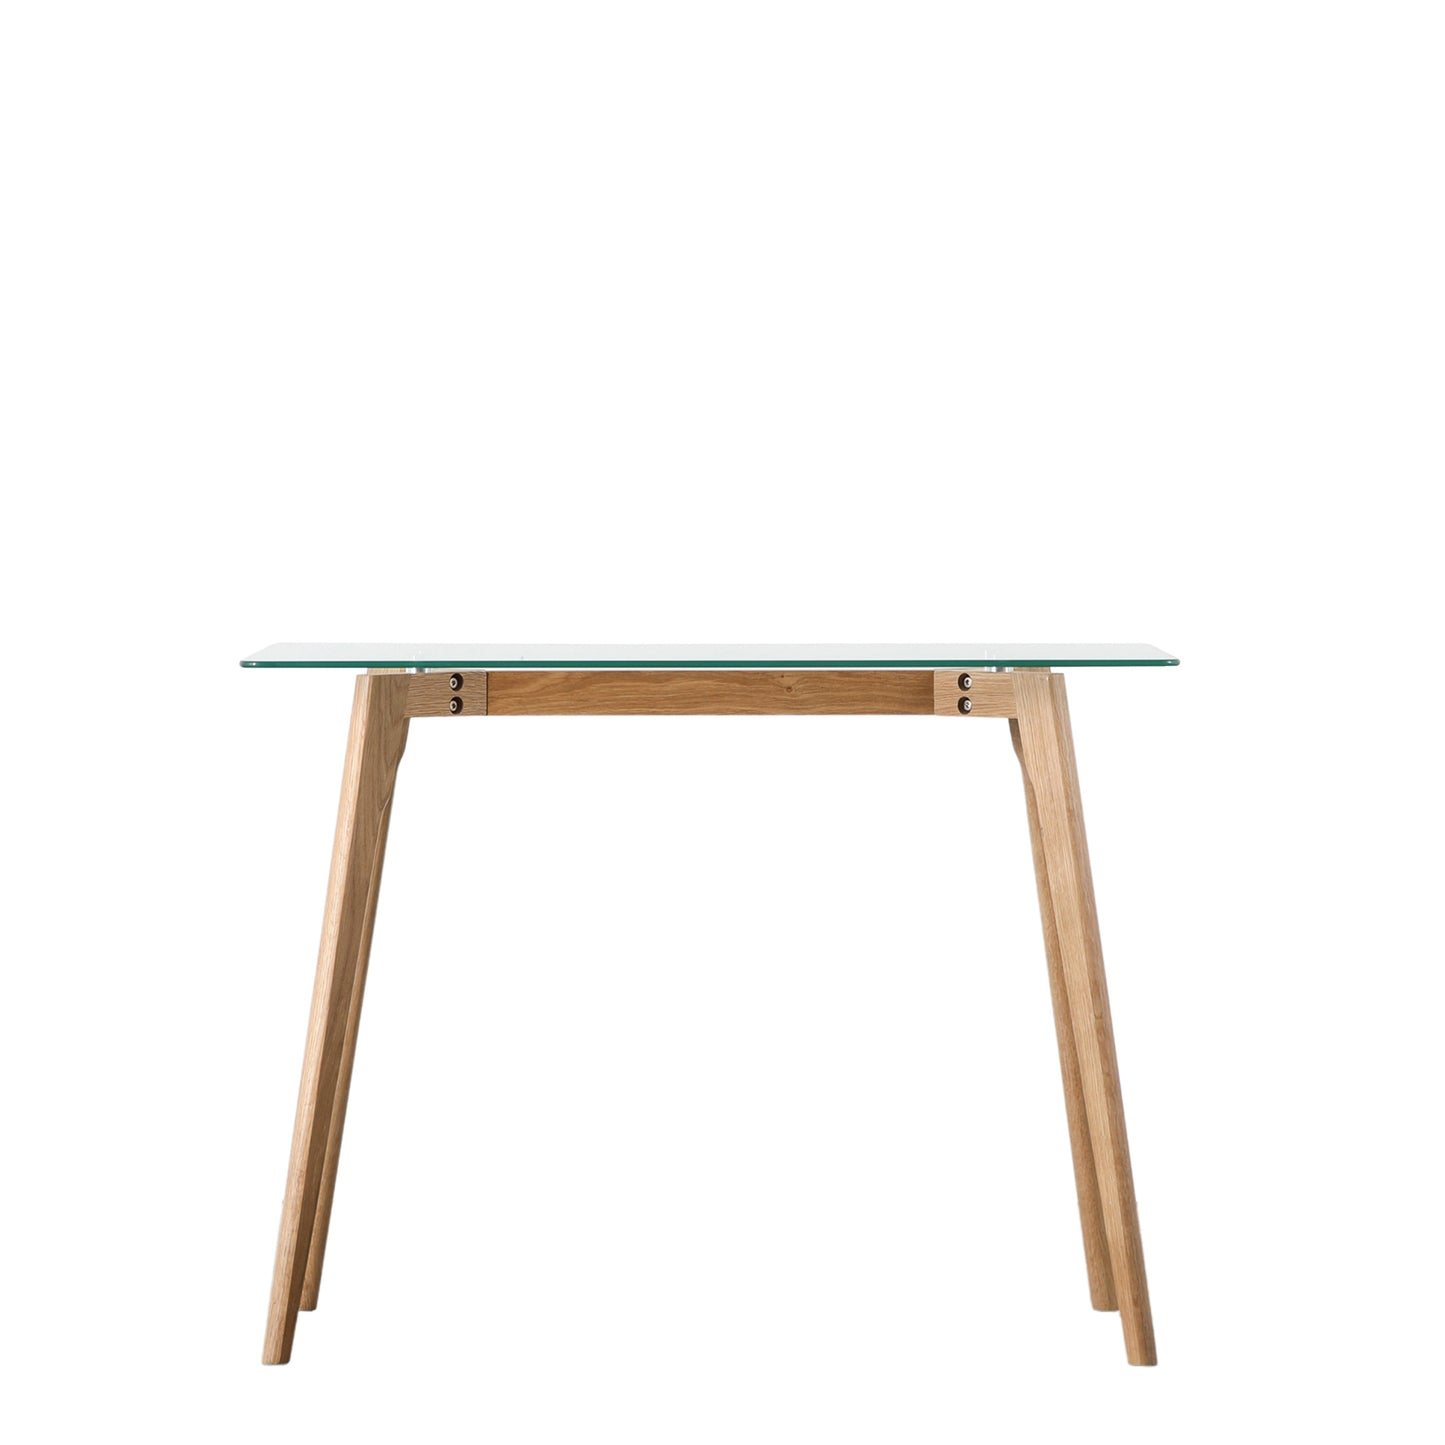 Load image into Gallery viewer, An oak desk with a glass top and wooden legs, perfect for home furniture and interior decor.
